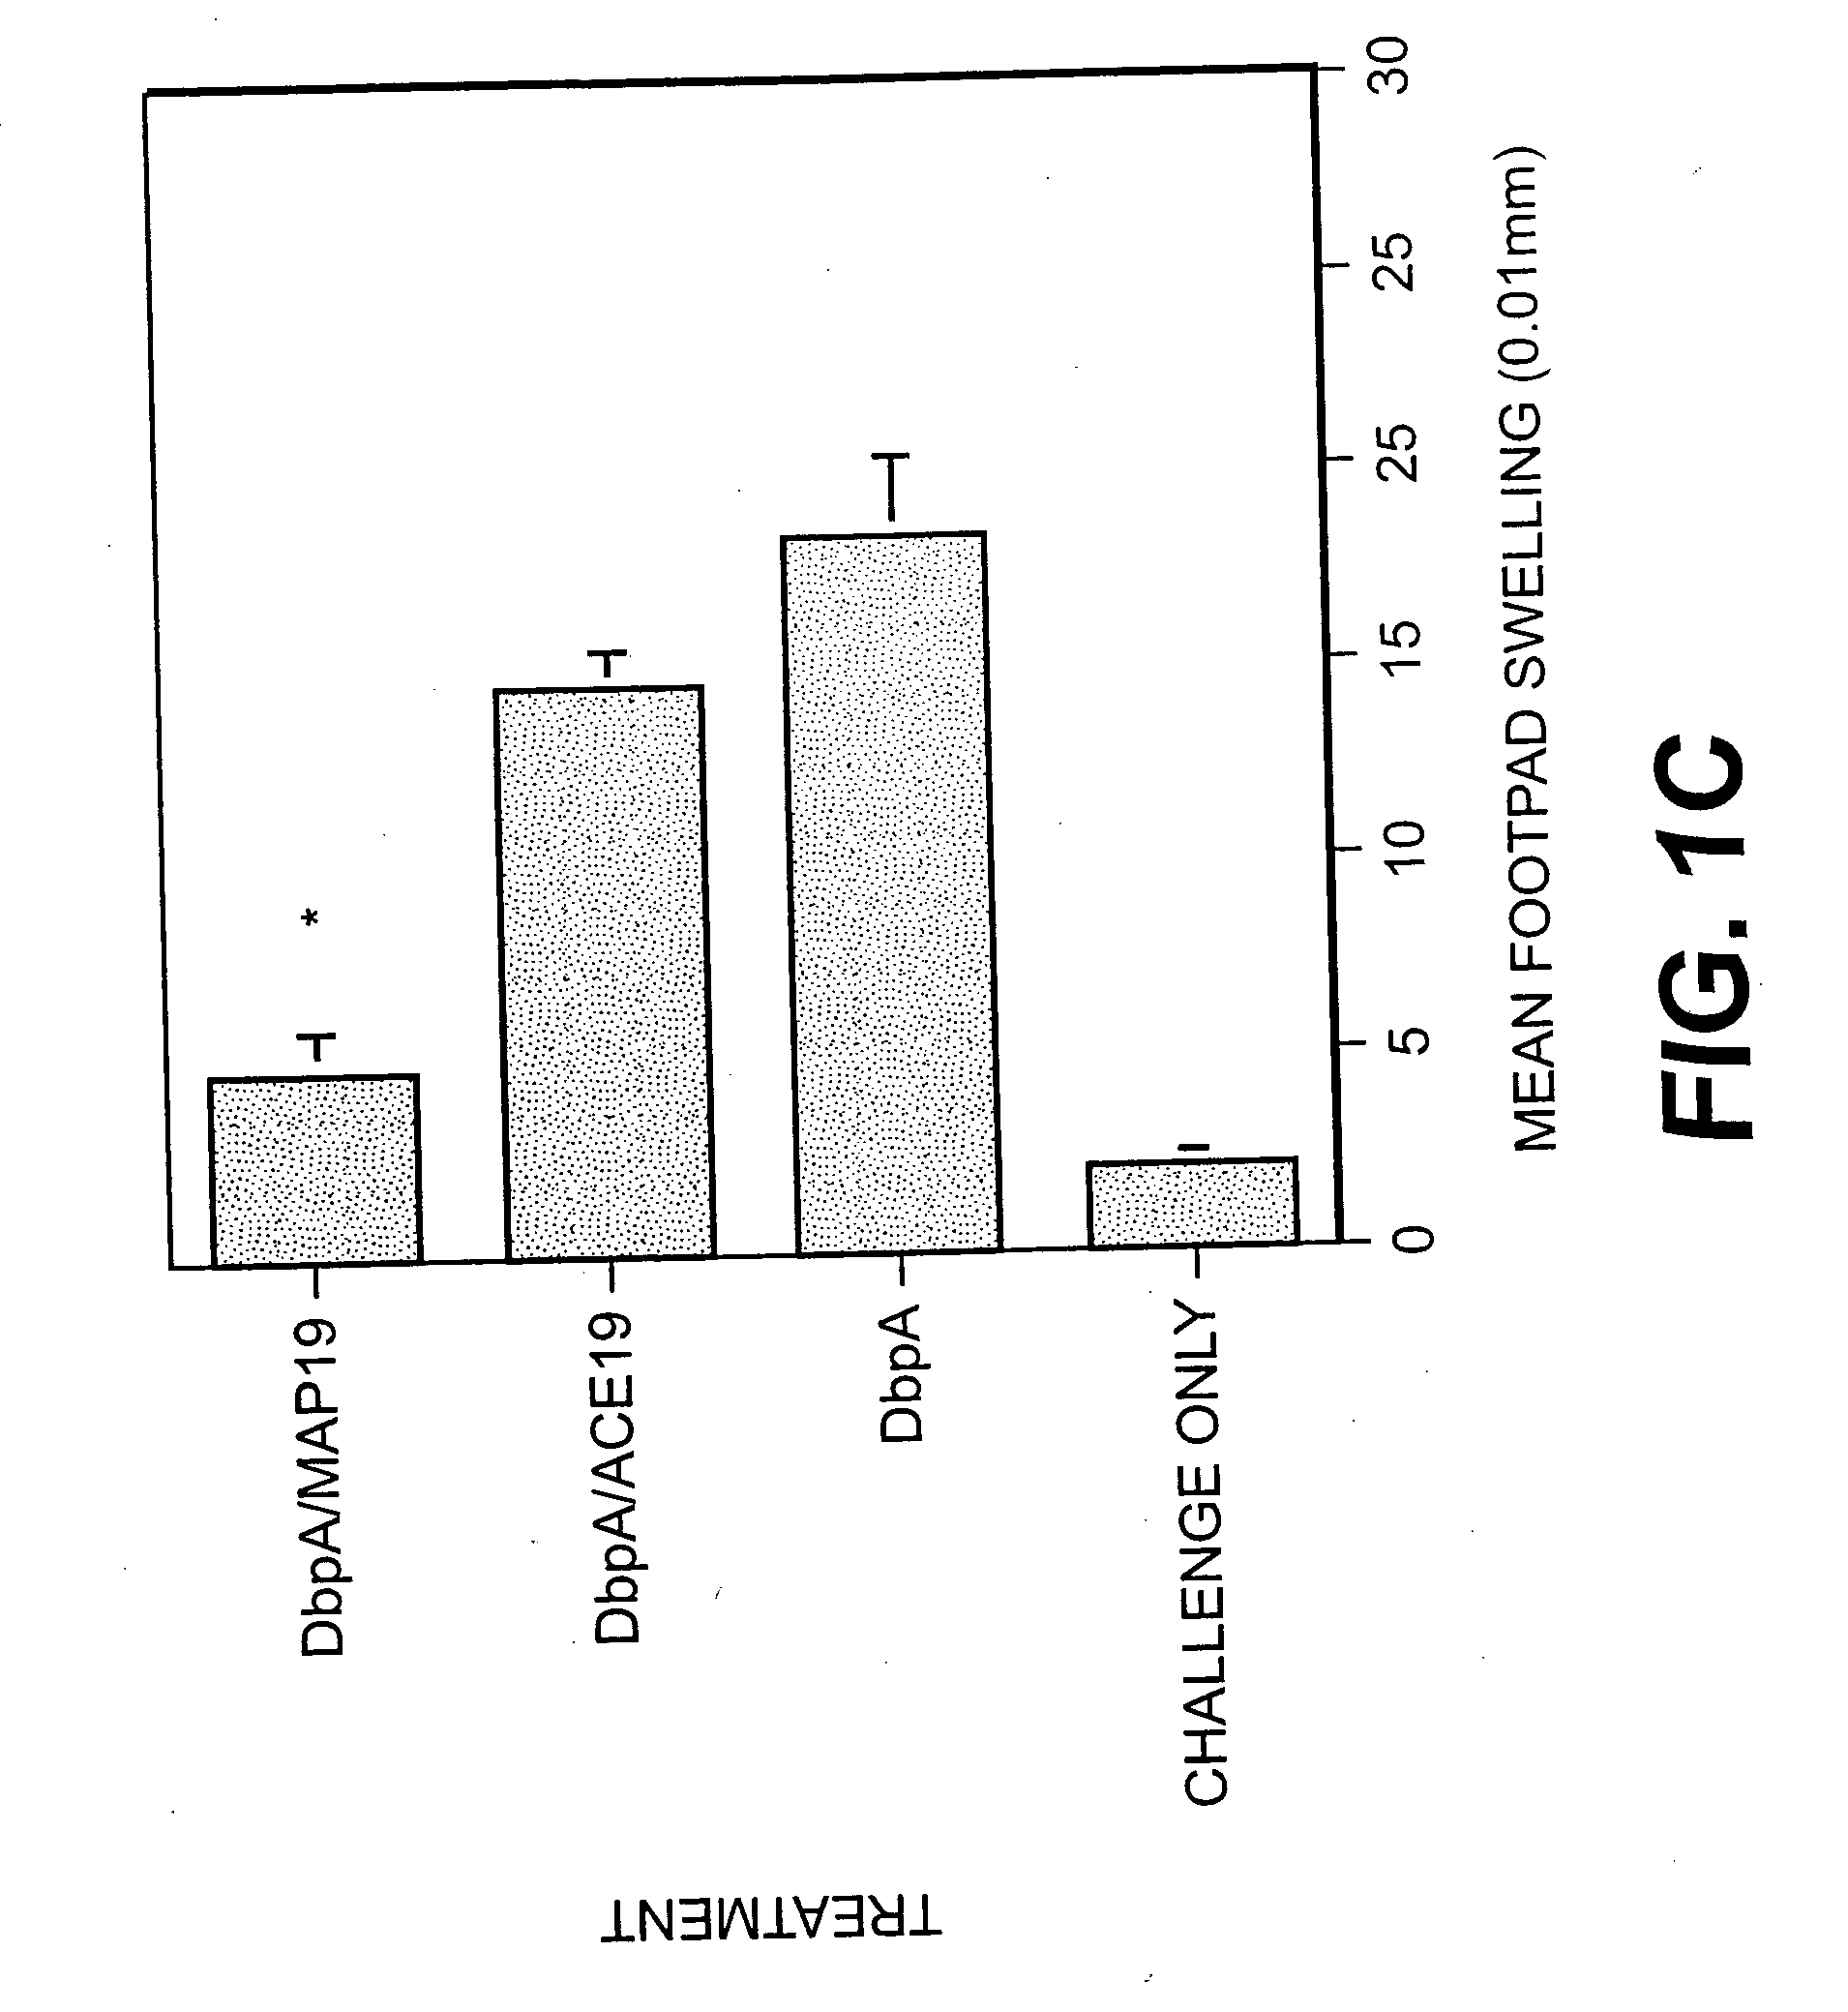 Method of preventing T cell-mediated responses by the use of the major histocompatibility complex class II analog protein (map protein) from Staphylococcus aureus